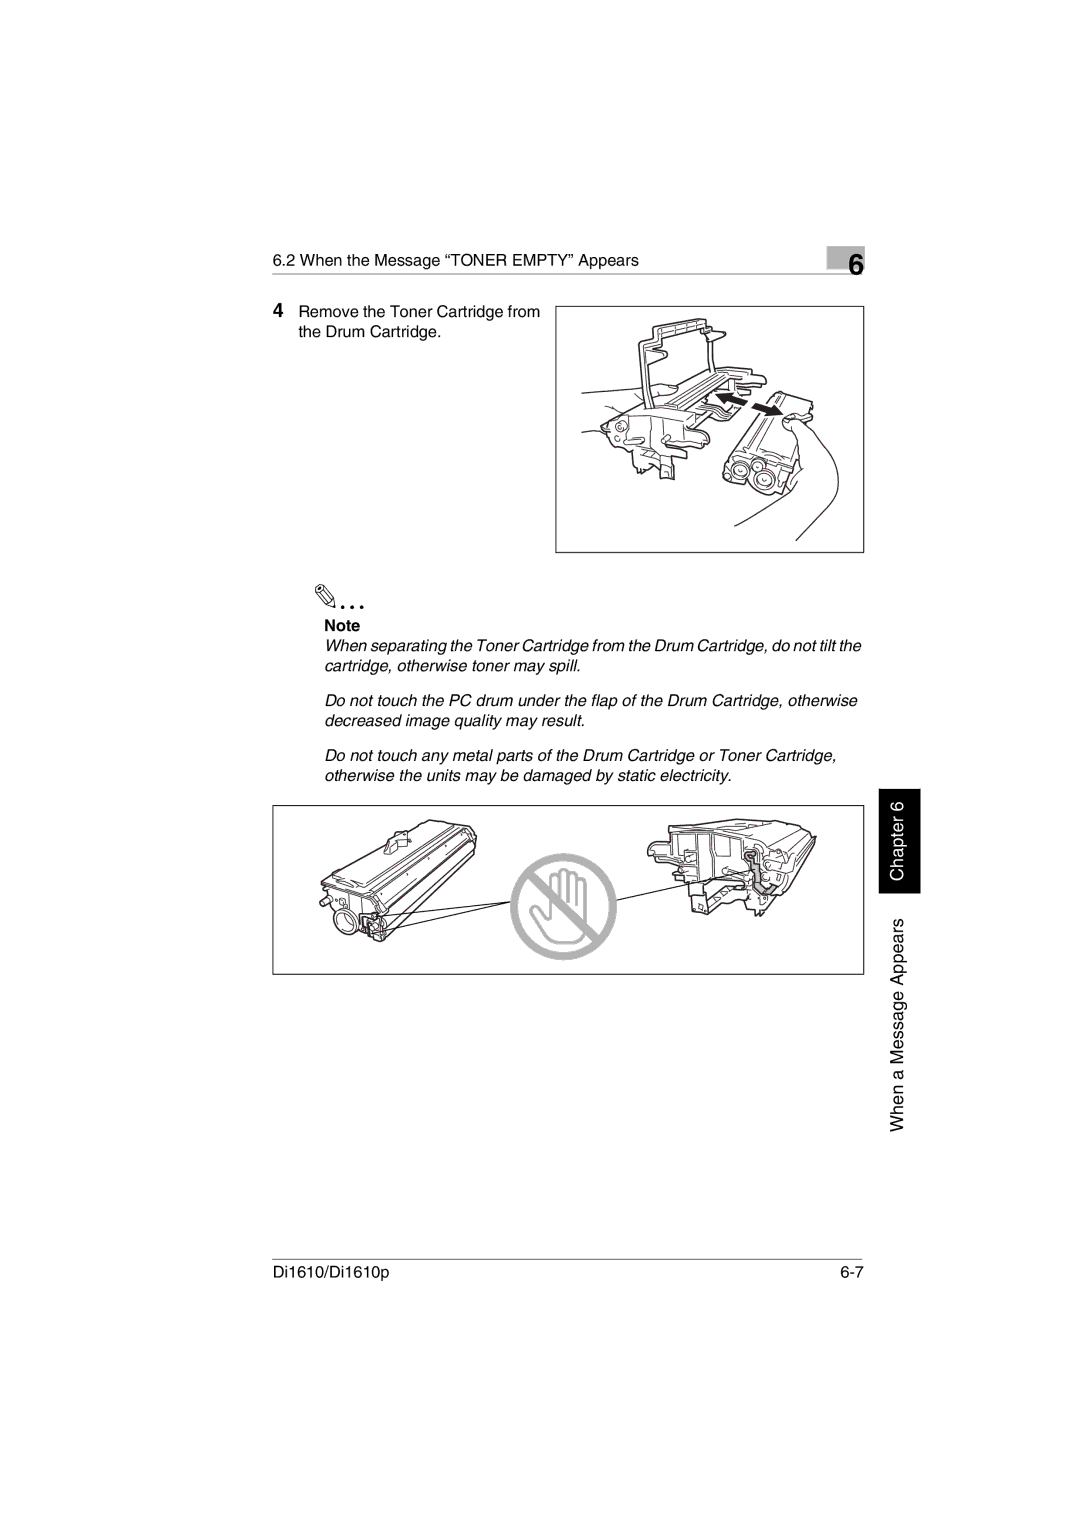 Konica Minolta Di1610p user manual When a Message Appears Chapter 